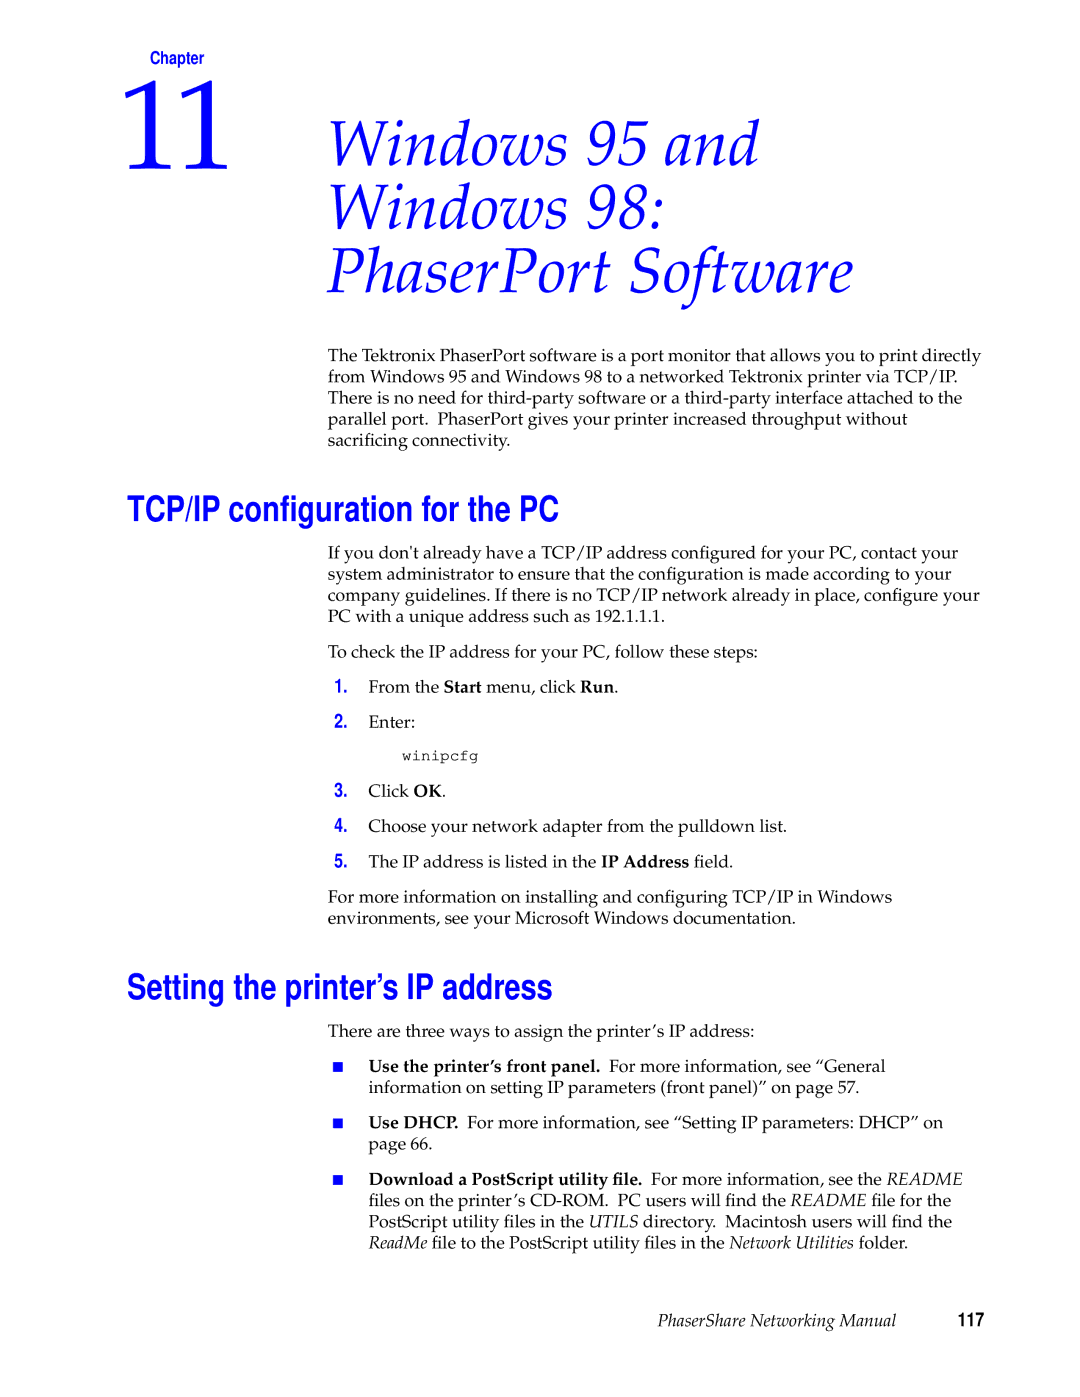 Xerox 360, 780, 840 manual Windows 95 PhaserPort Software, TCP/IP conﬁguration for the PC, 117 